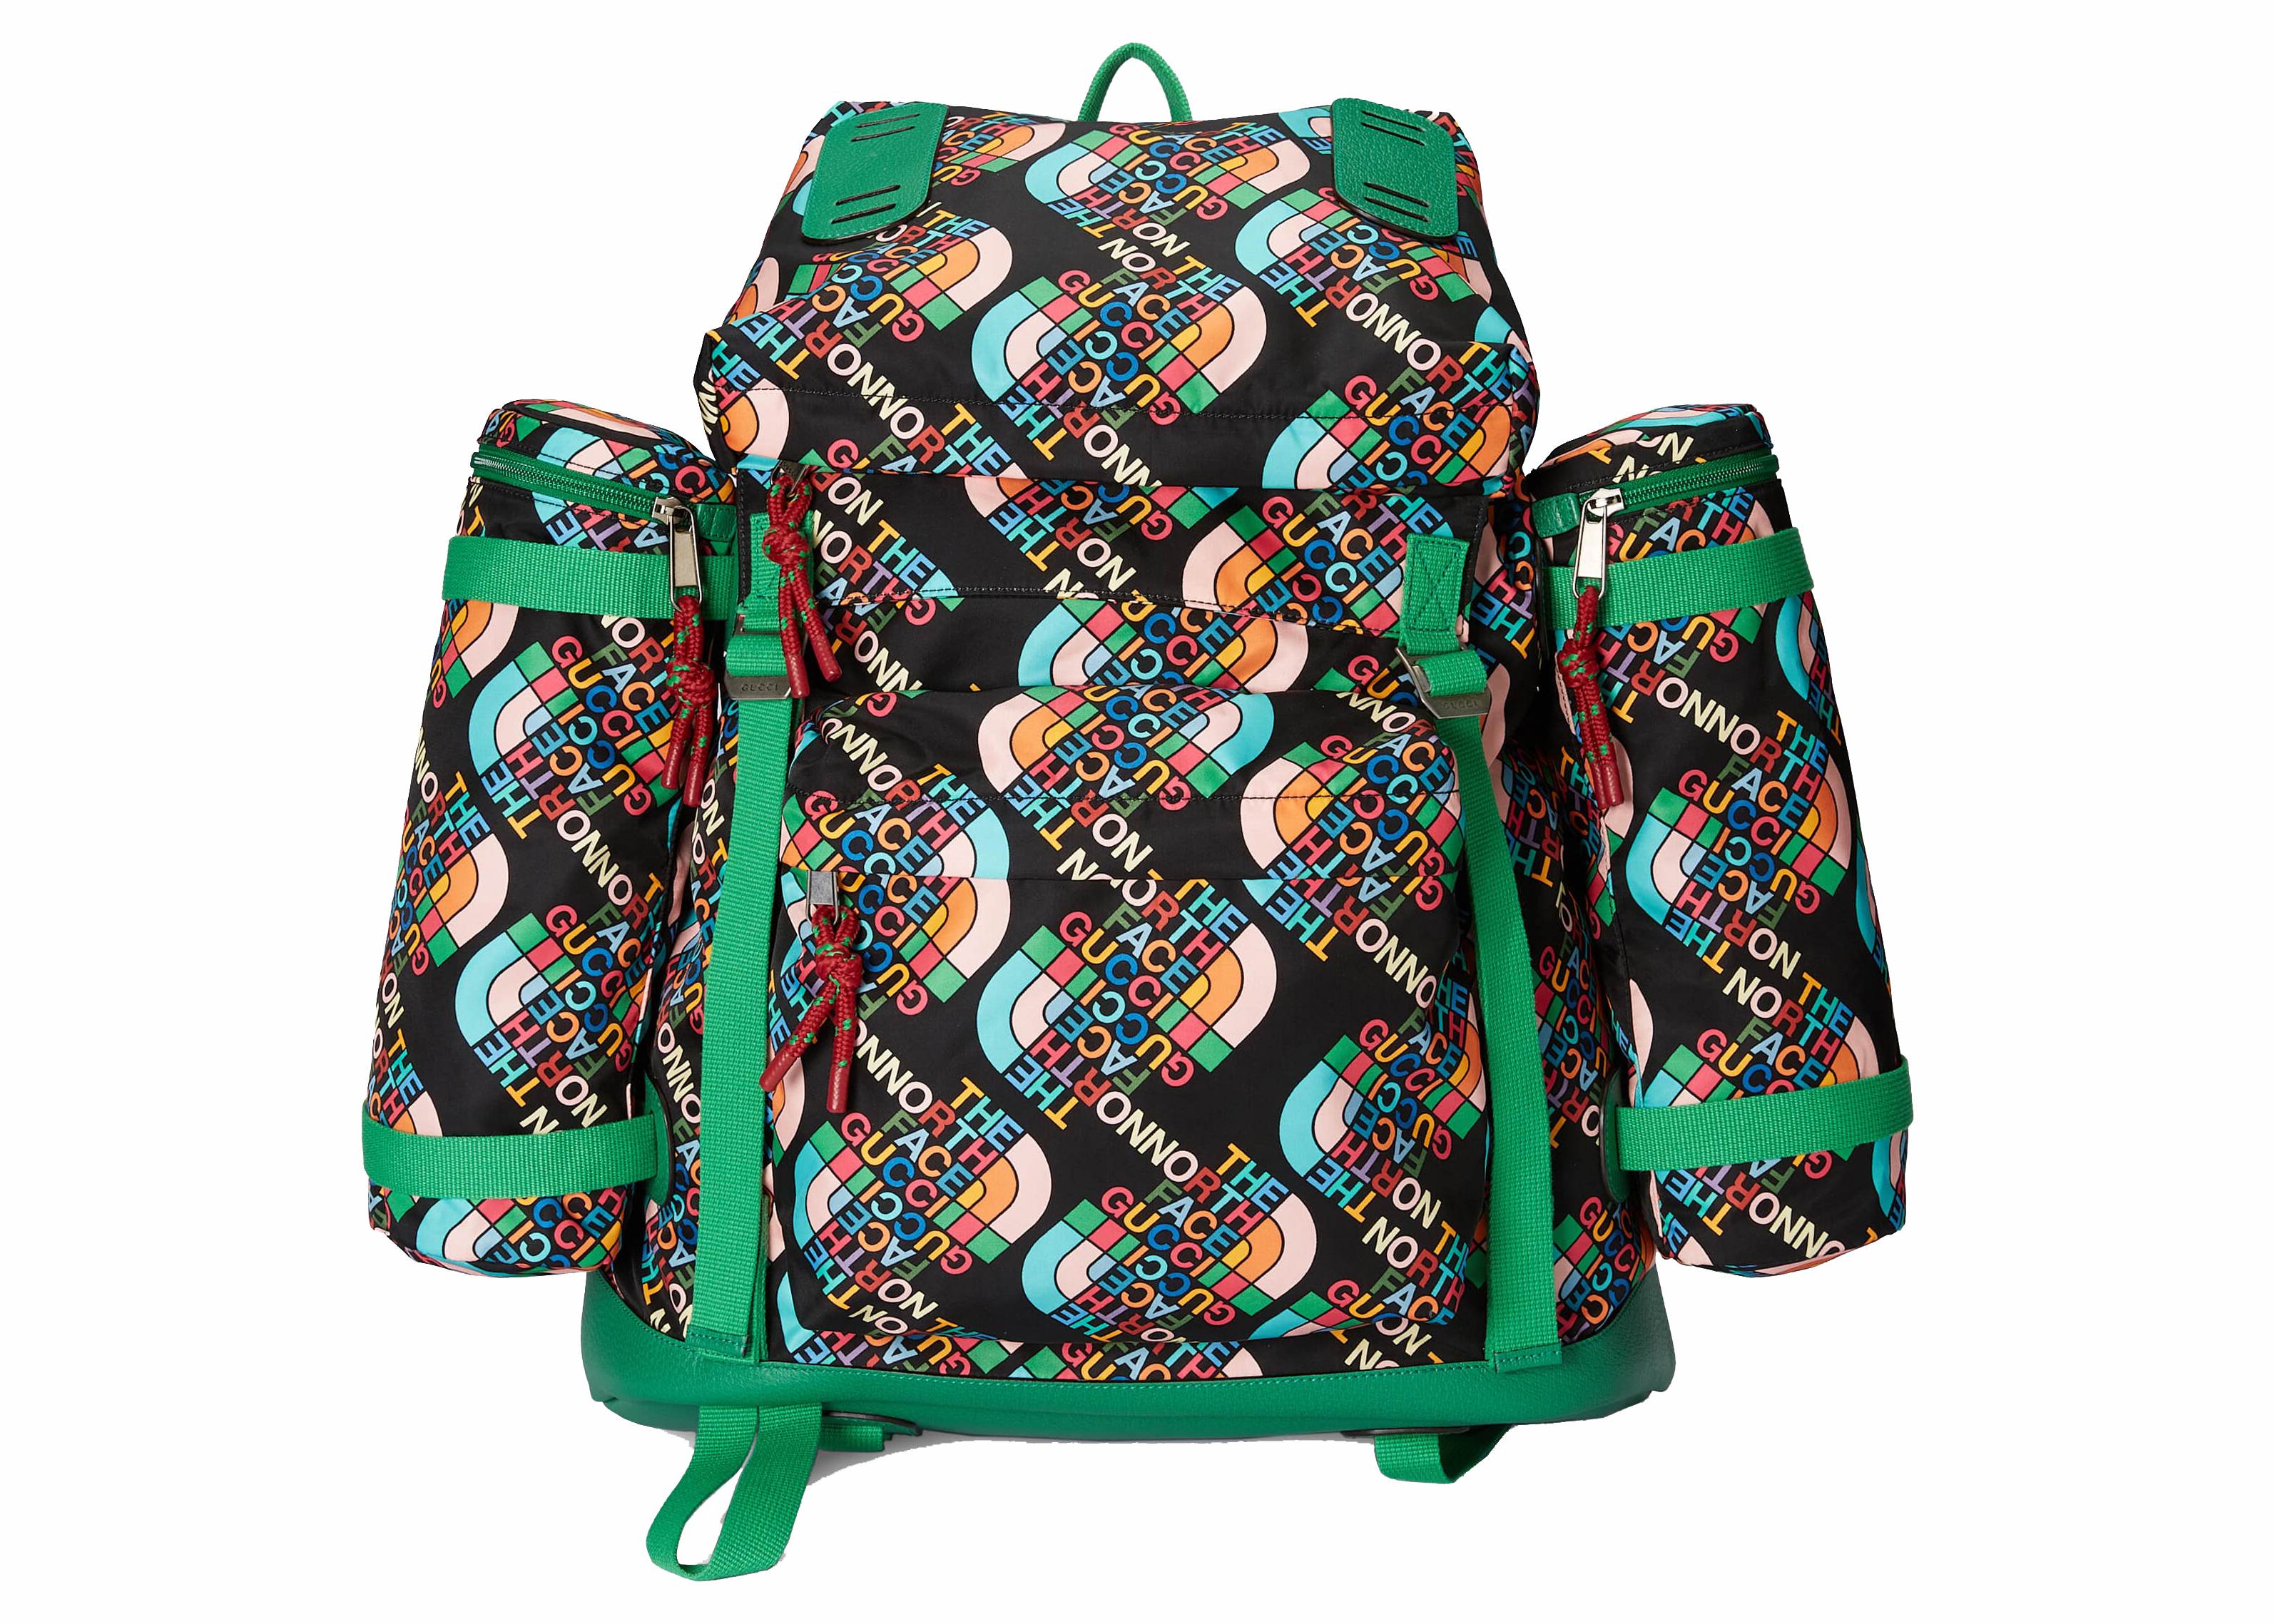 Gucci x The North Face Gucci Backpack Black/Multicolor in Recycled 